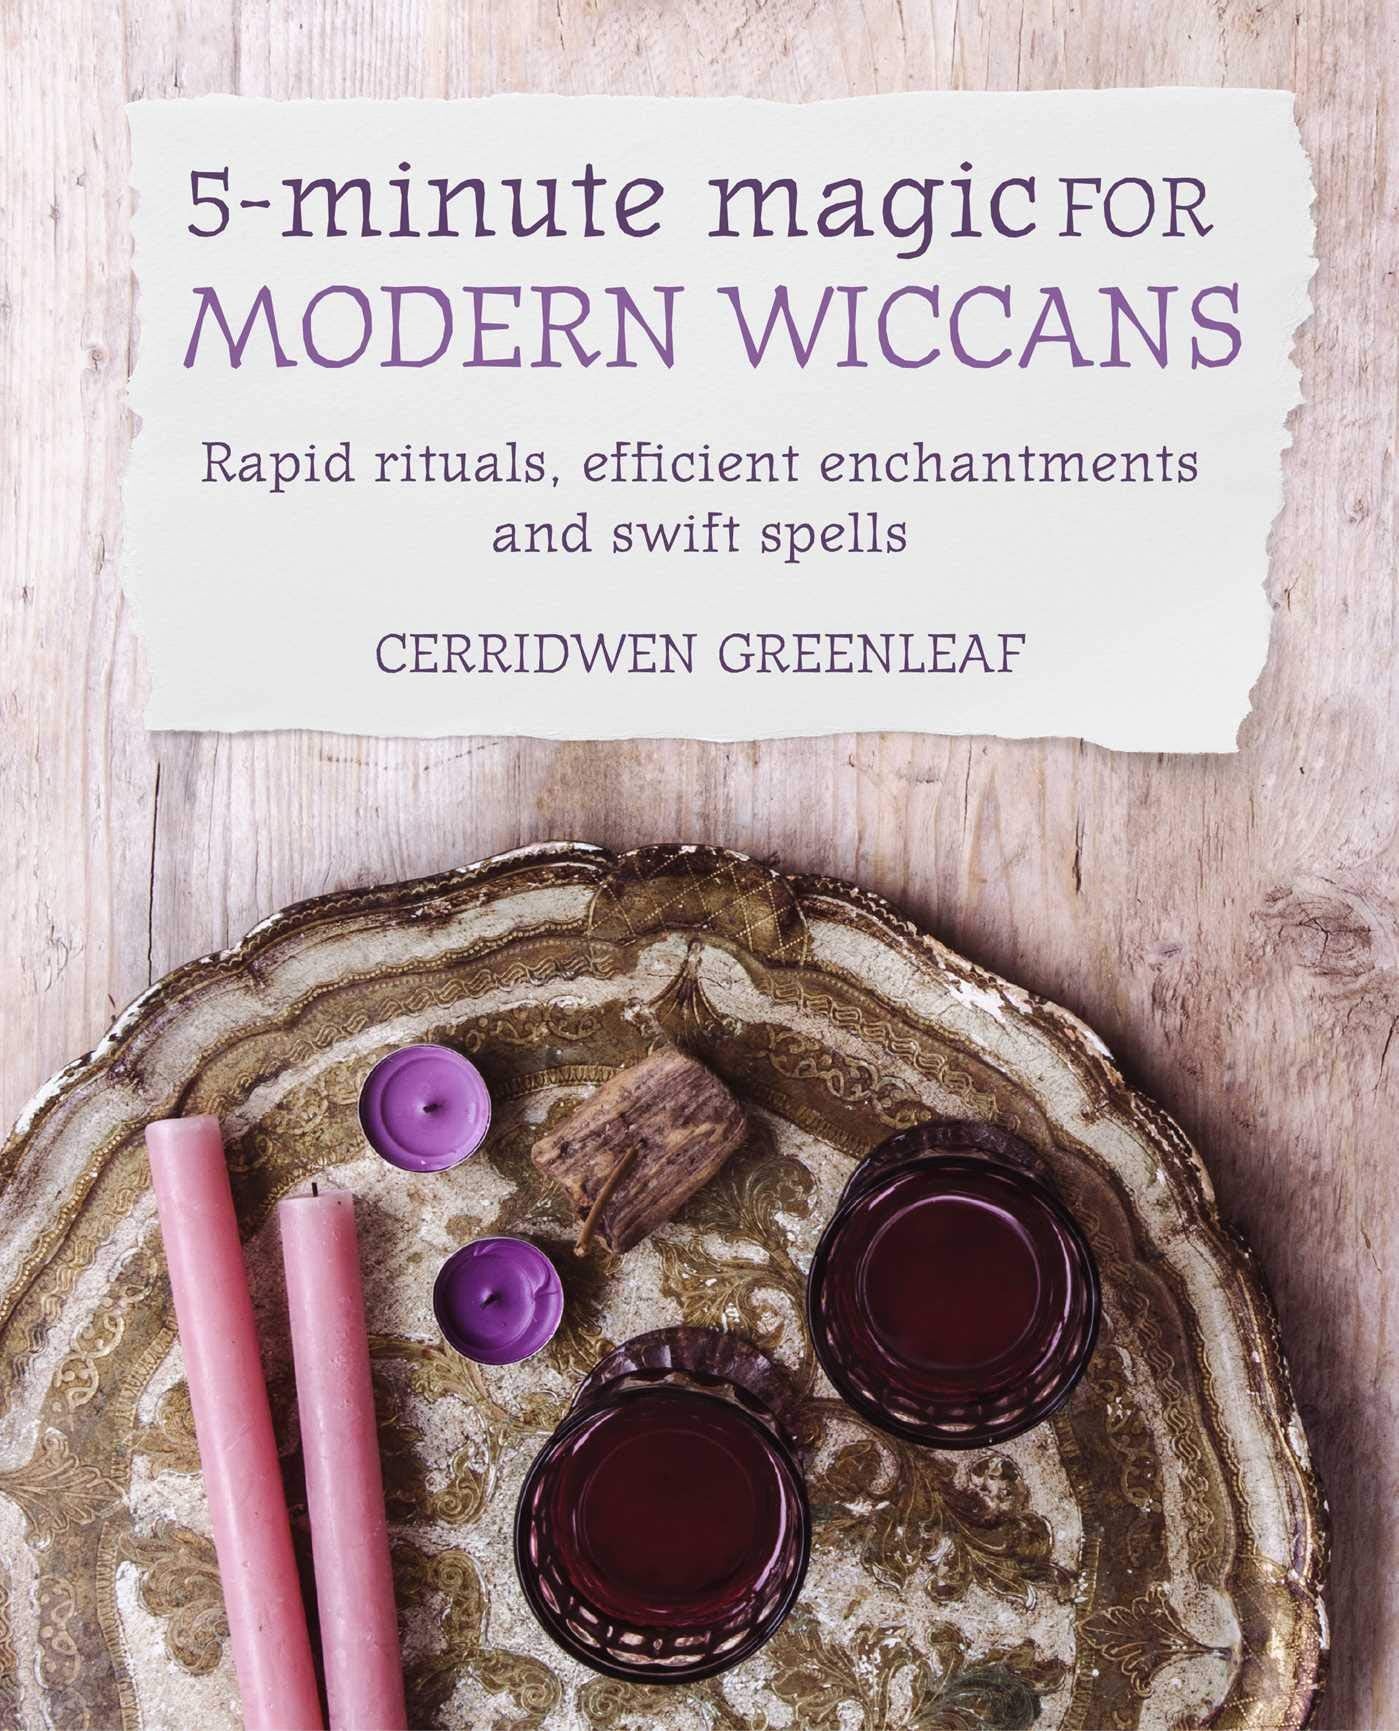 5 Minute Magic For Modern Wiccans by Cerridwen Greenleaf